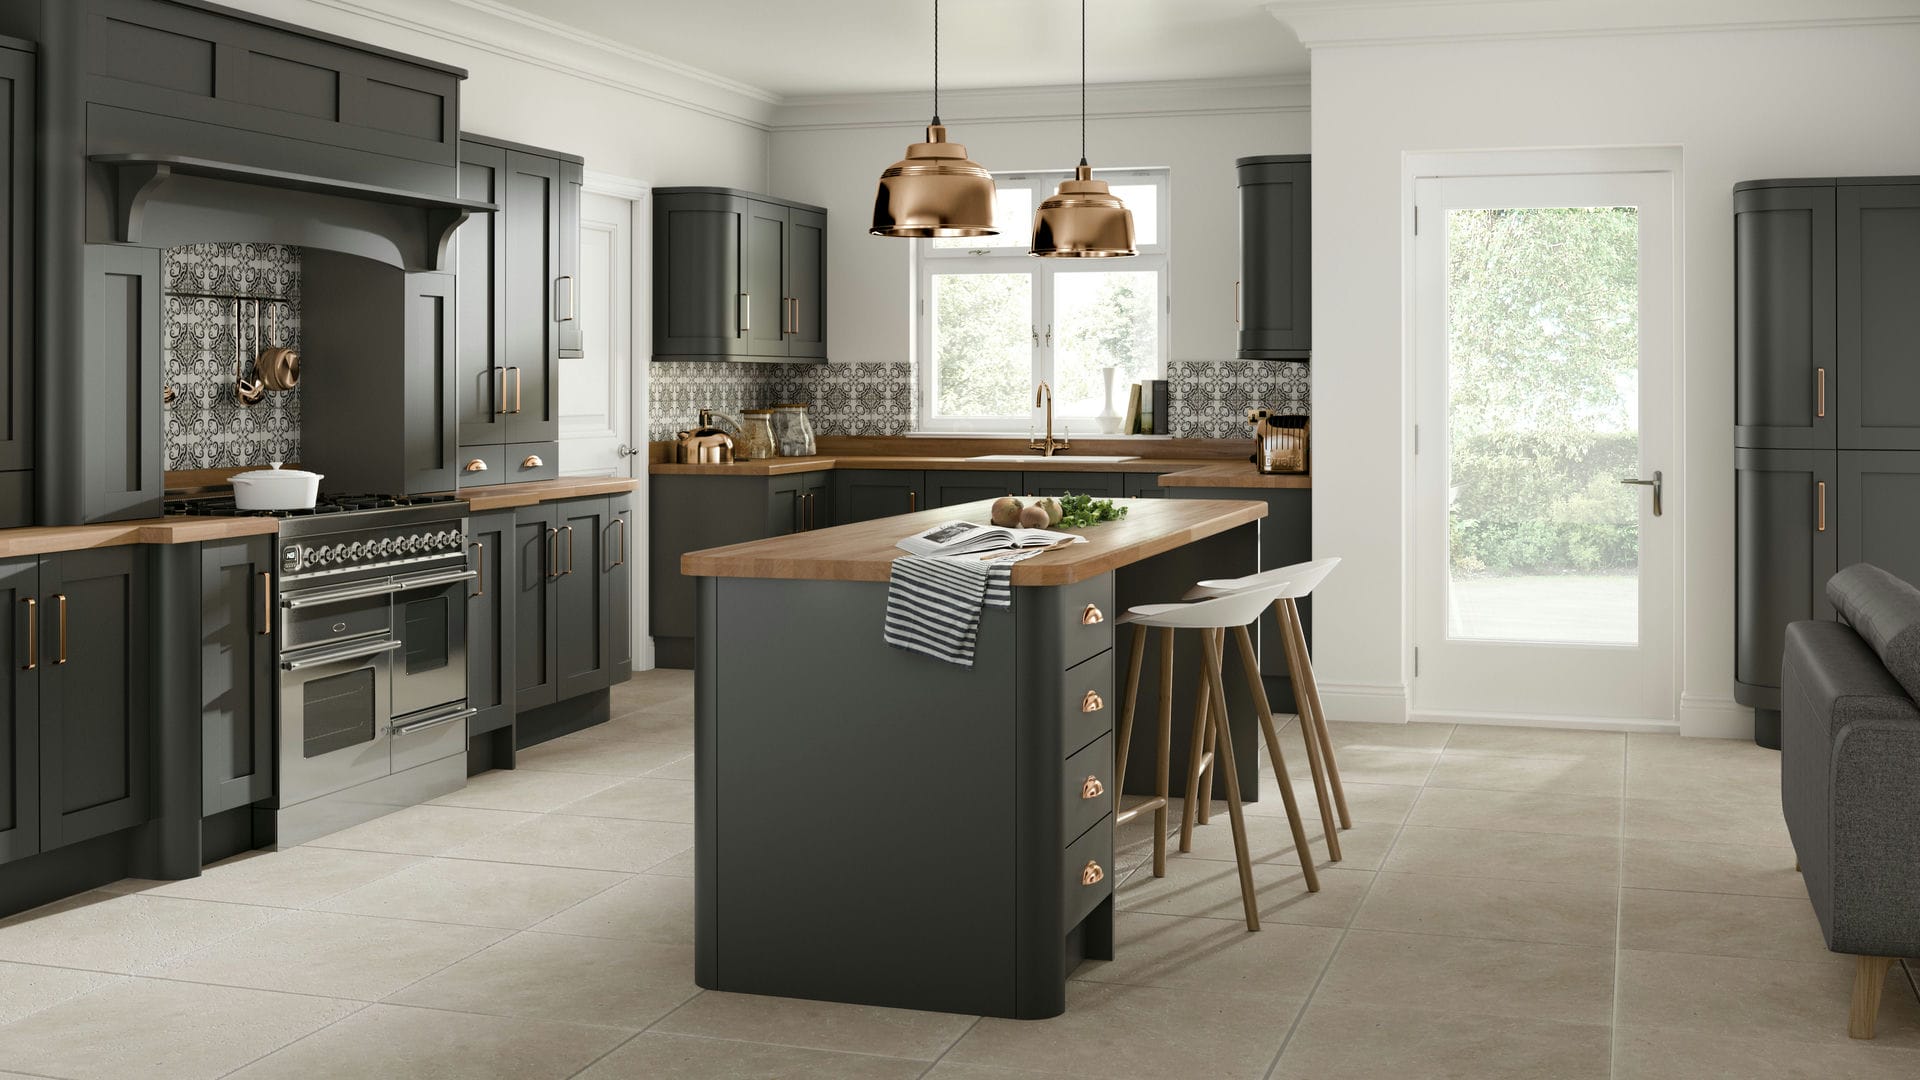 Signature smooth graphite kitchens exuding a chic, monochrome style with a silky, graphite finish